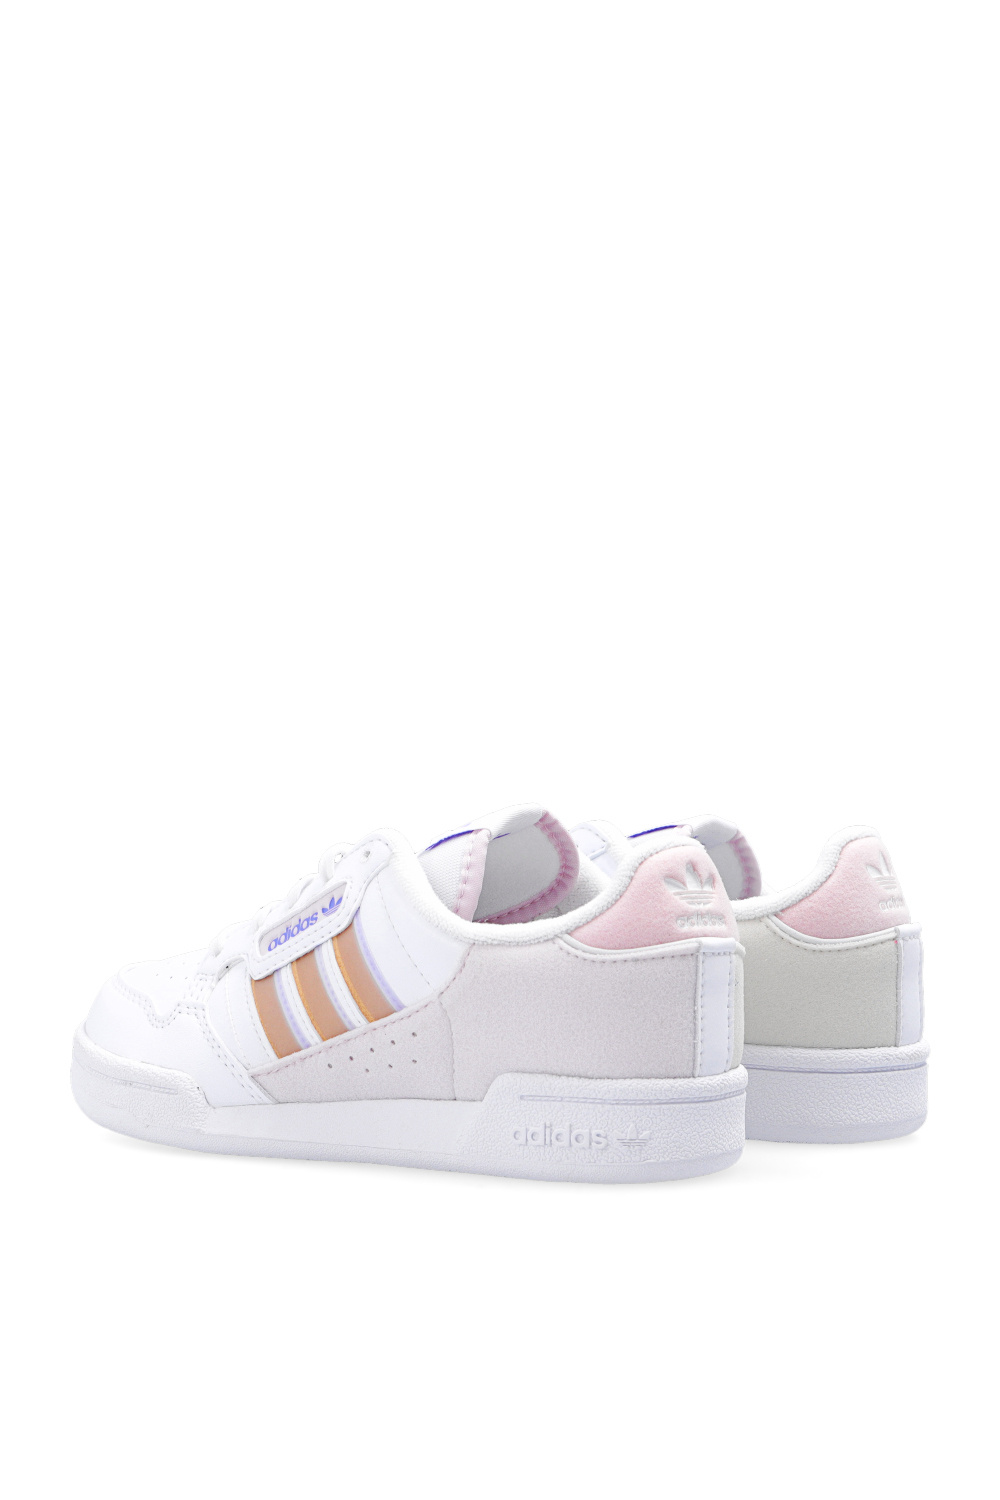 adidas hiangle Kids ‘Continental 80 Stripes C’ sneakers